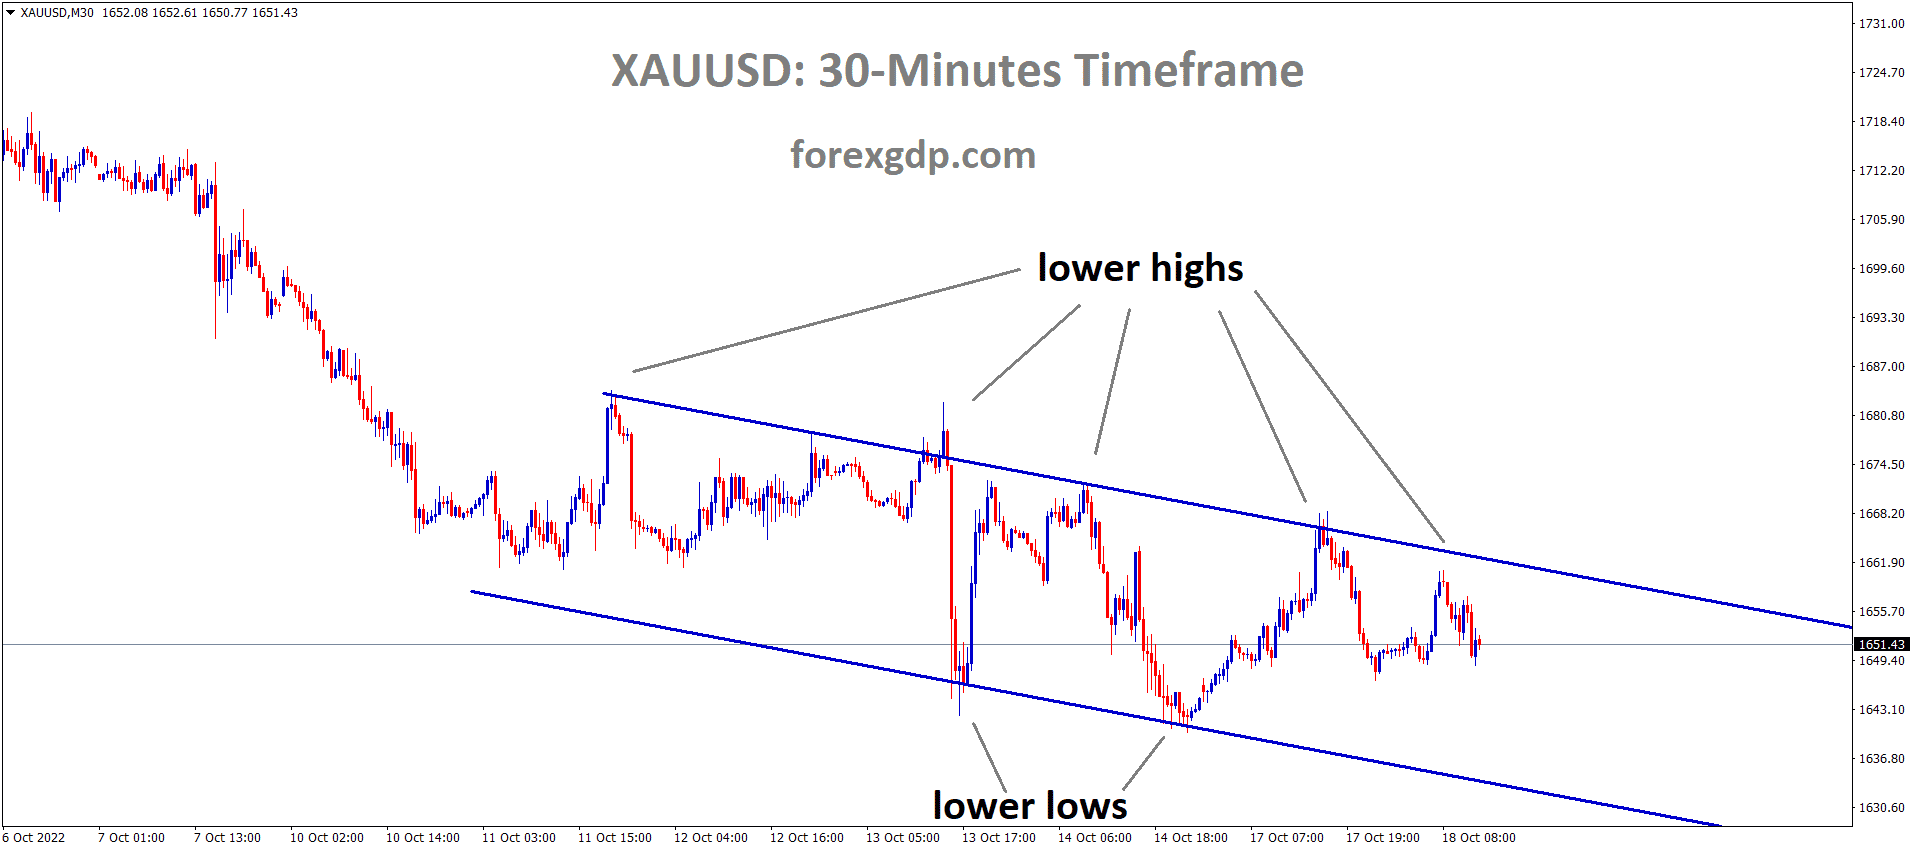 XAUUSD Gold price is moving in the descending channel and the market has fallen from the lower high area of the channel. 1